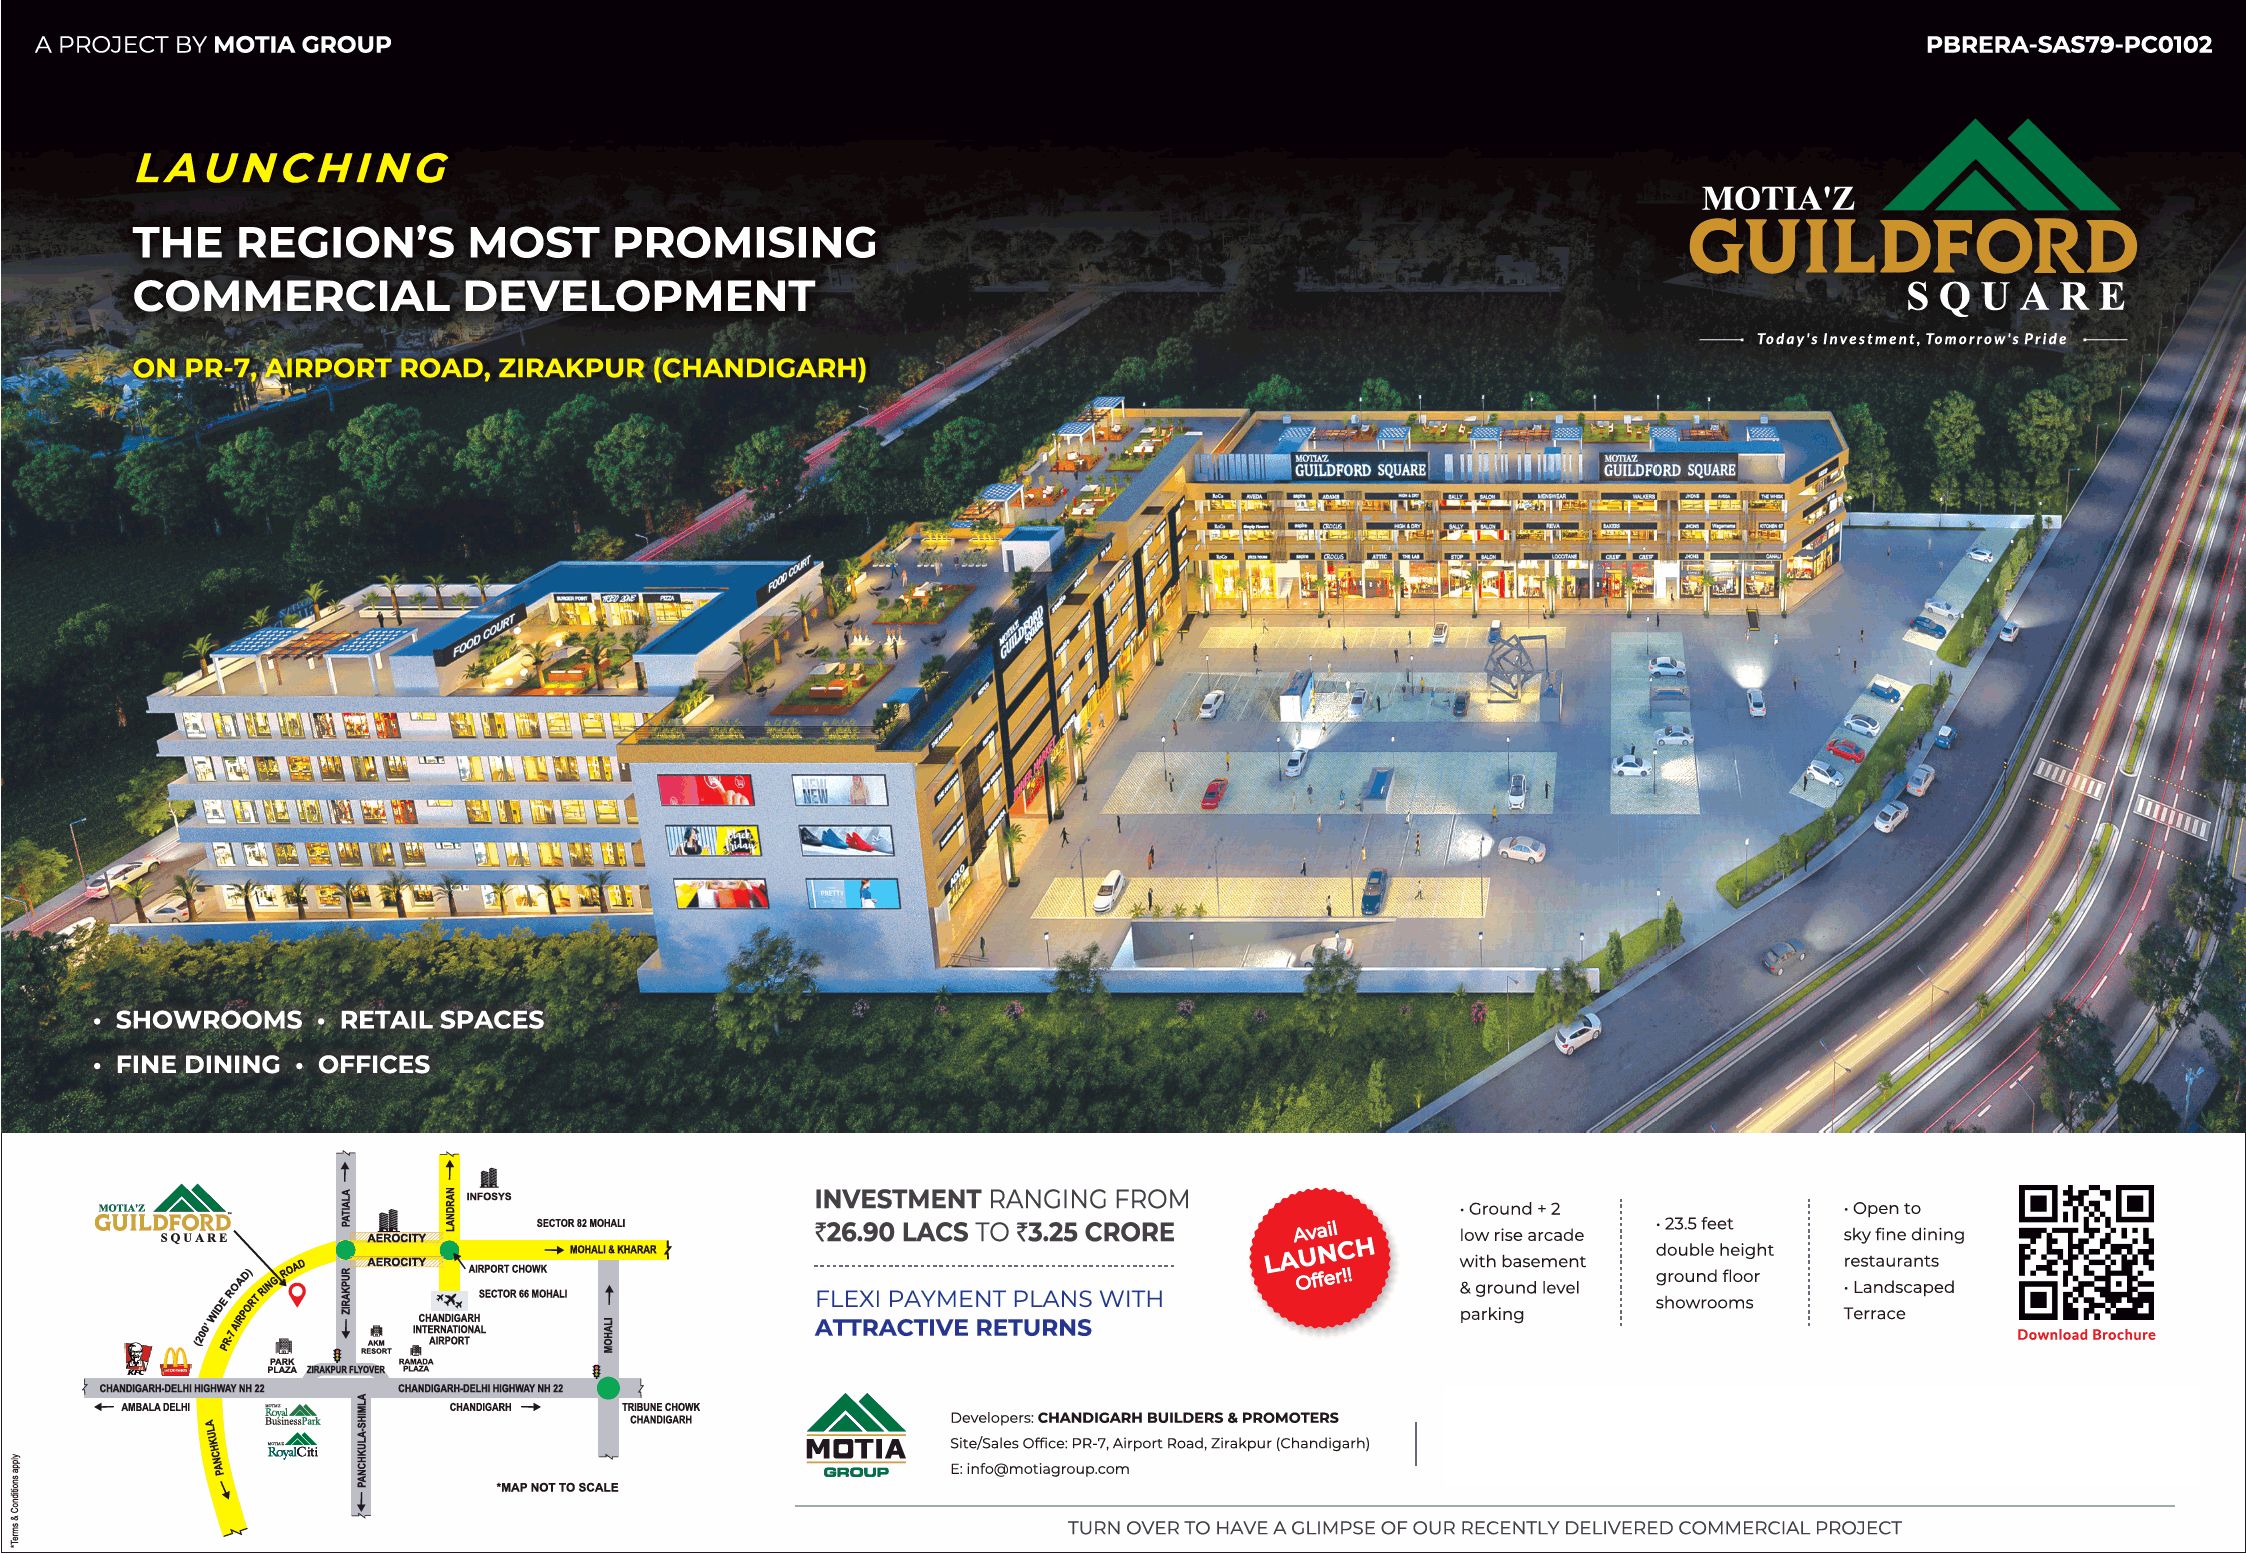 Launching the region's most promising commercial development at Motiaz Guildford Square in Zirakpur, Chandigarh